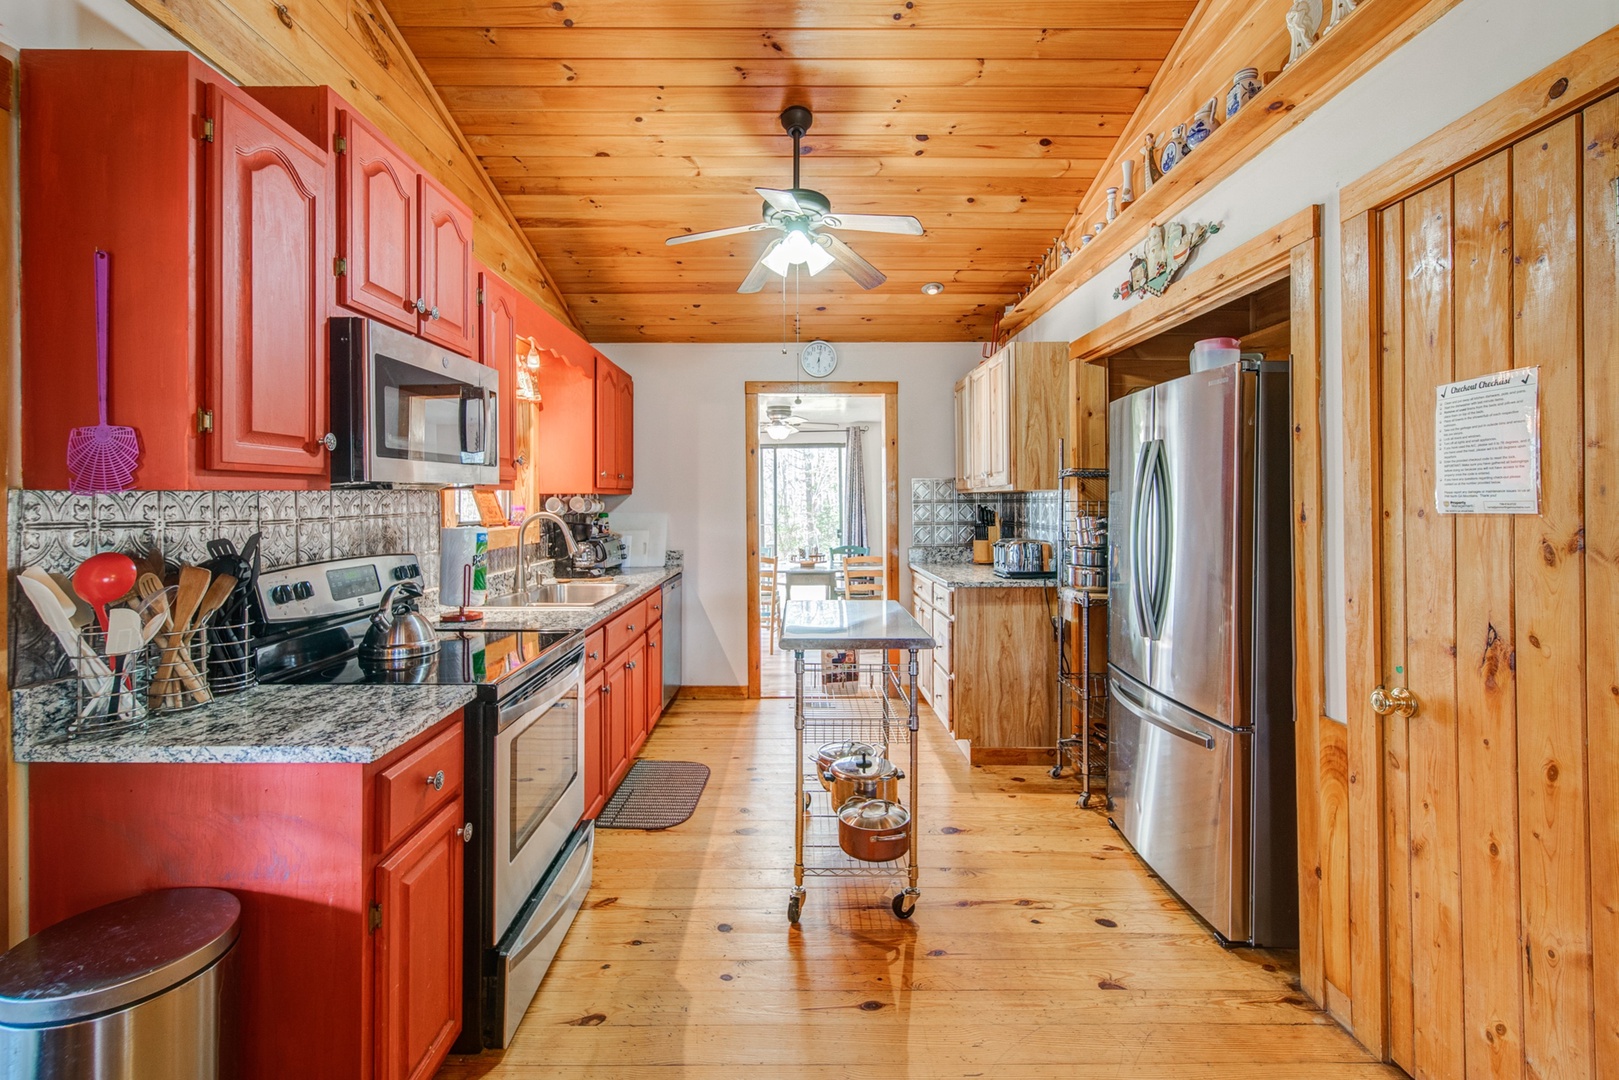 This home offers a spacious, airy kitchen with industrial touches that is well-equipped for your stay